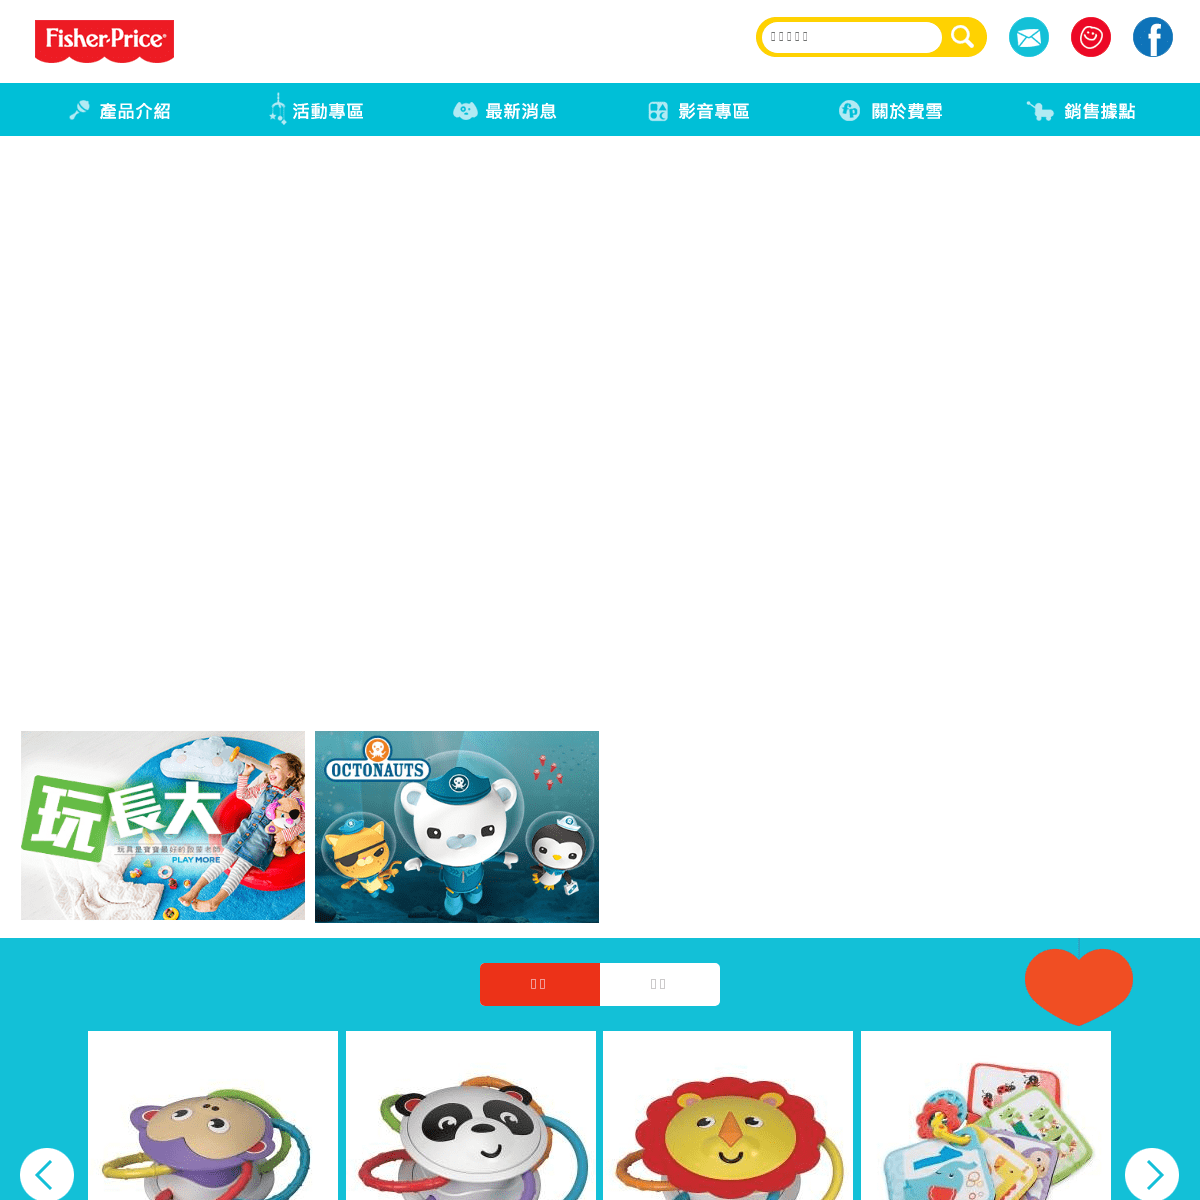 A complete backup of fisherprice.com.tw